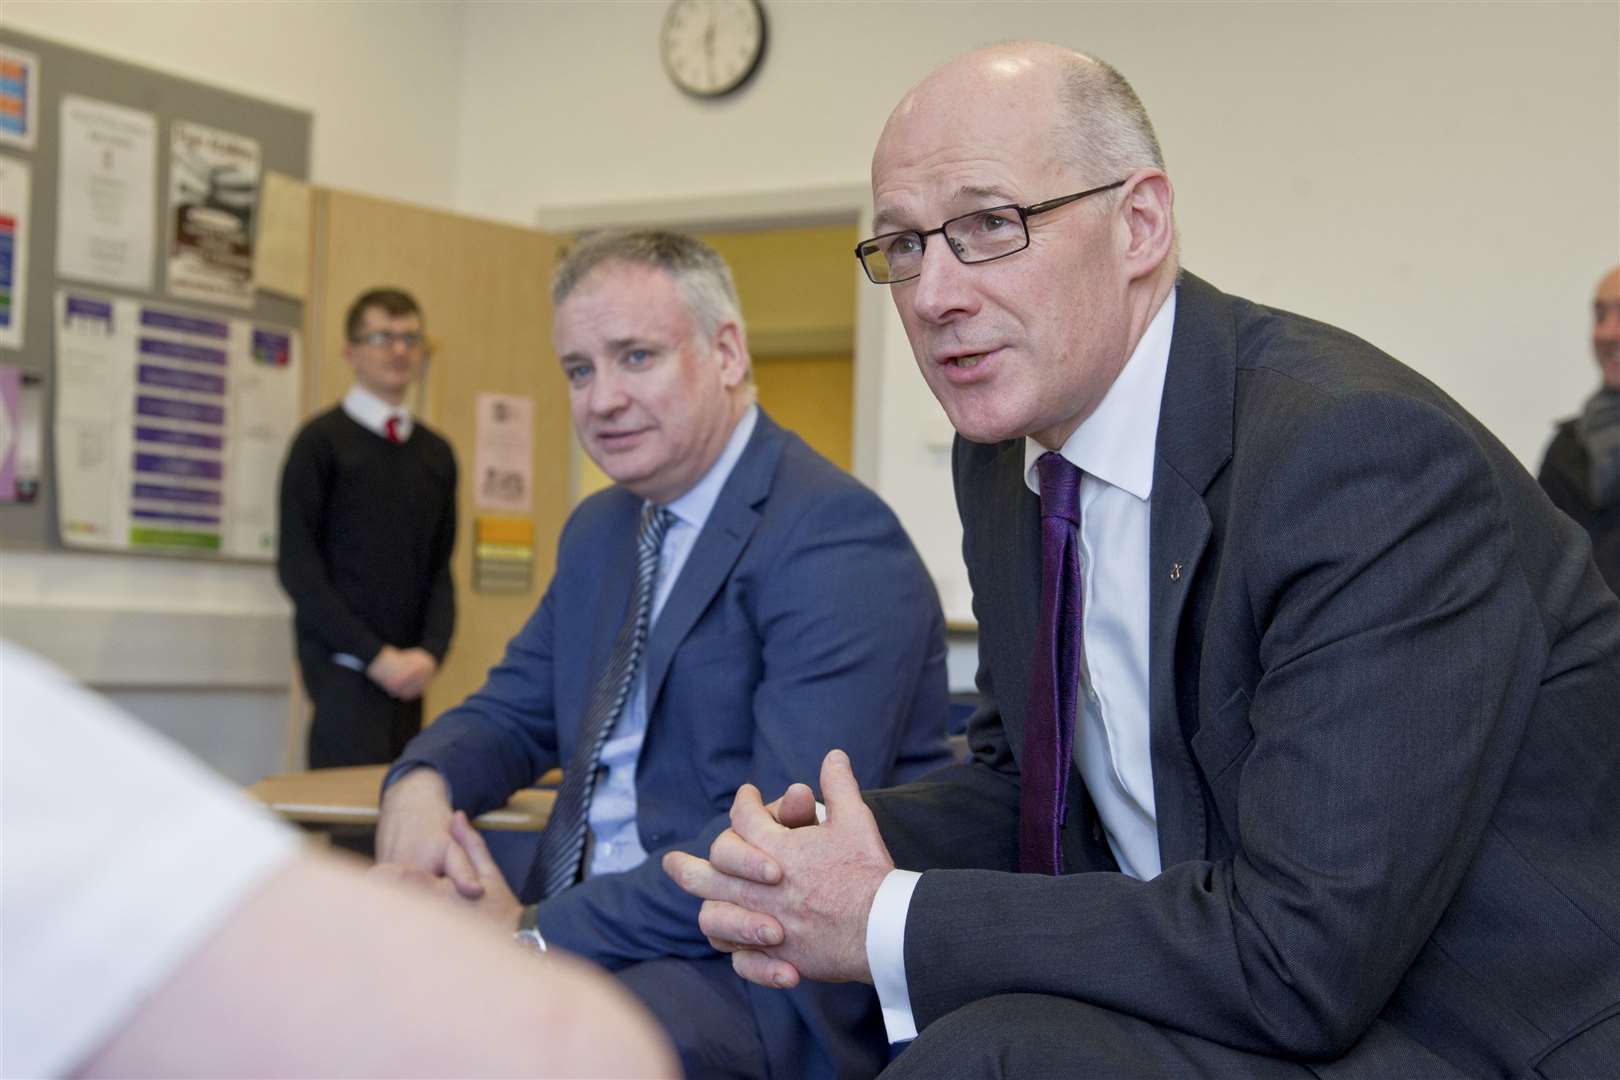 John Swinney, Deputy First Minister of Scotland and the Cabinet Secretary for Education and Skills, visits Elgin Academy. Picture: Daniel Forsyth